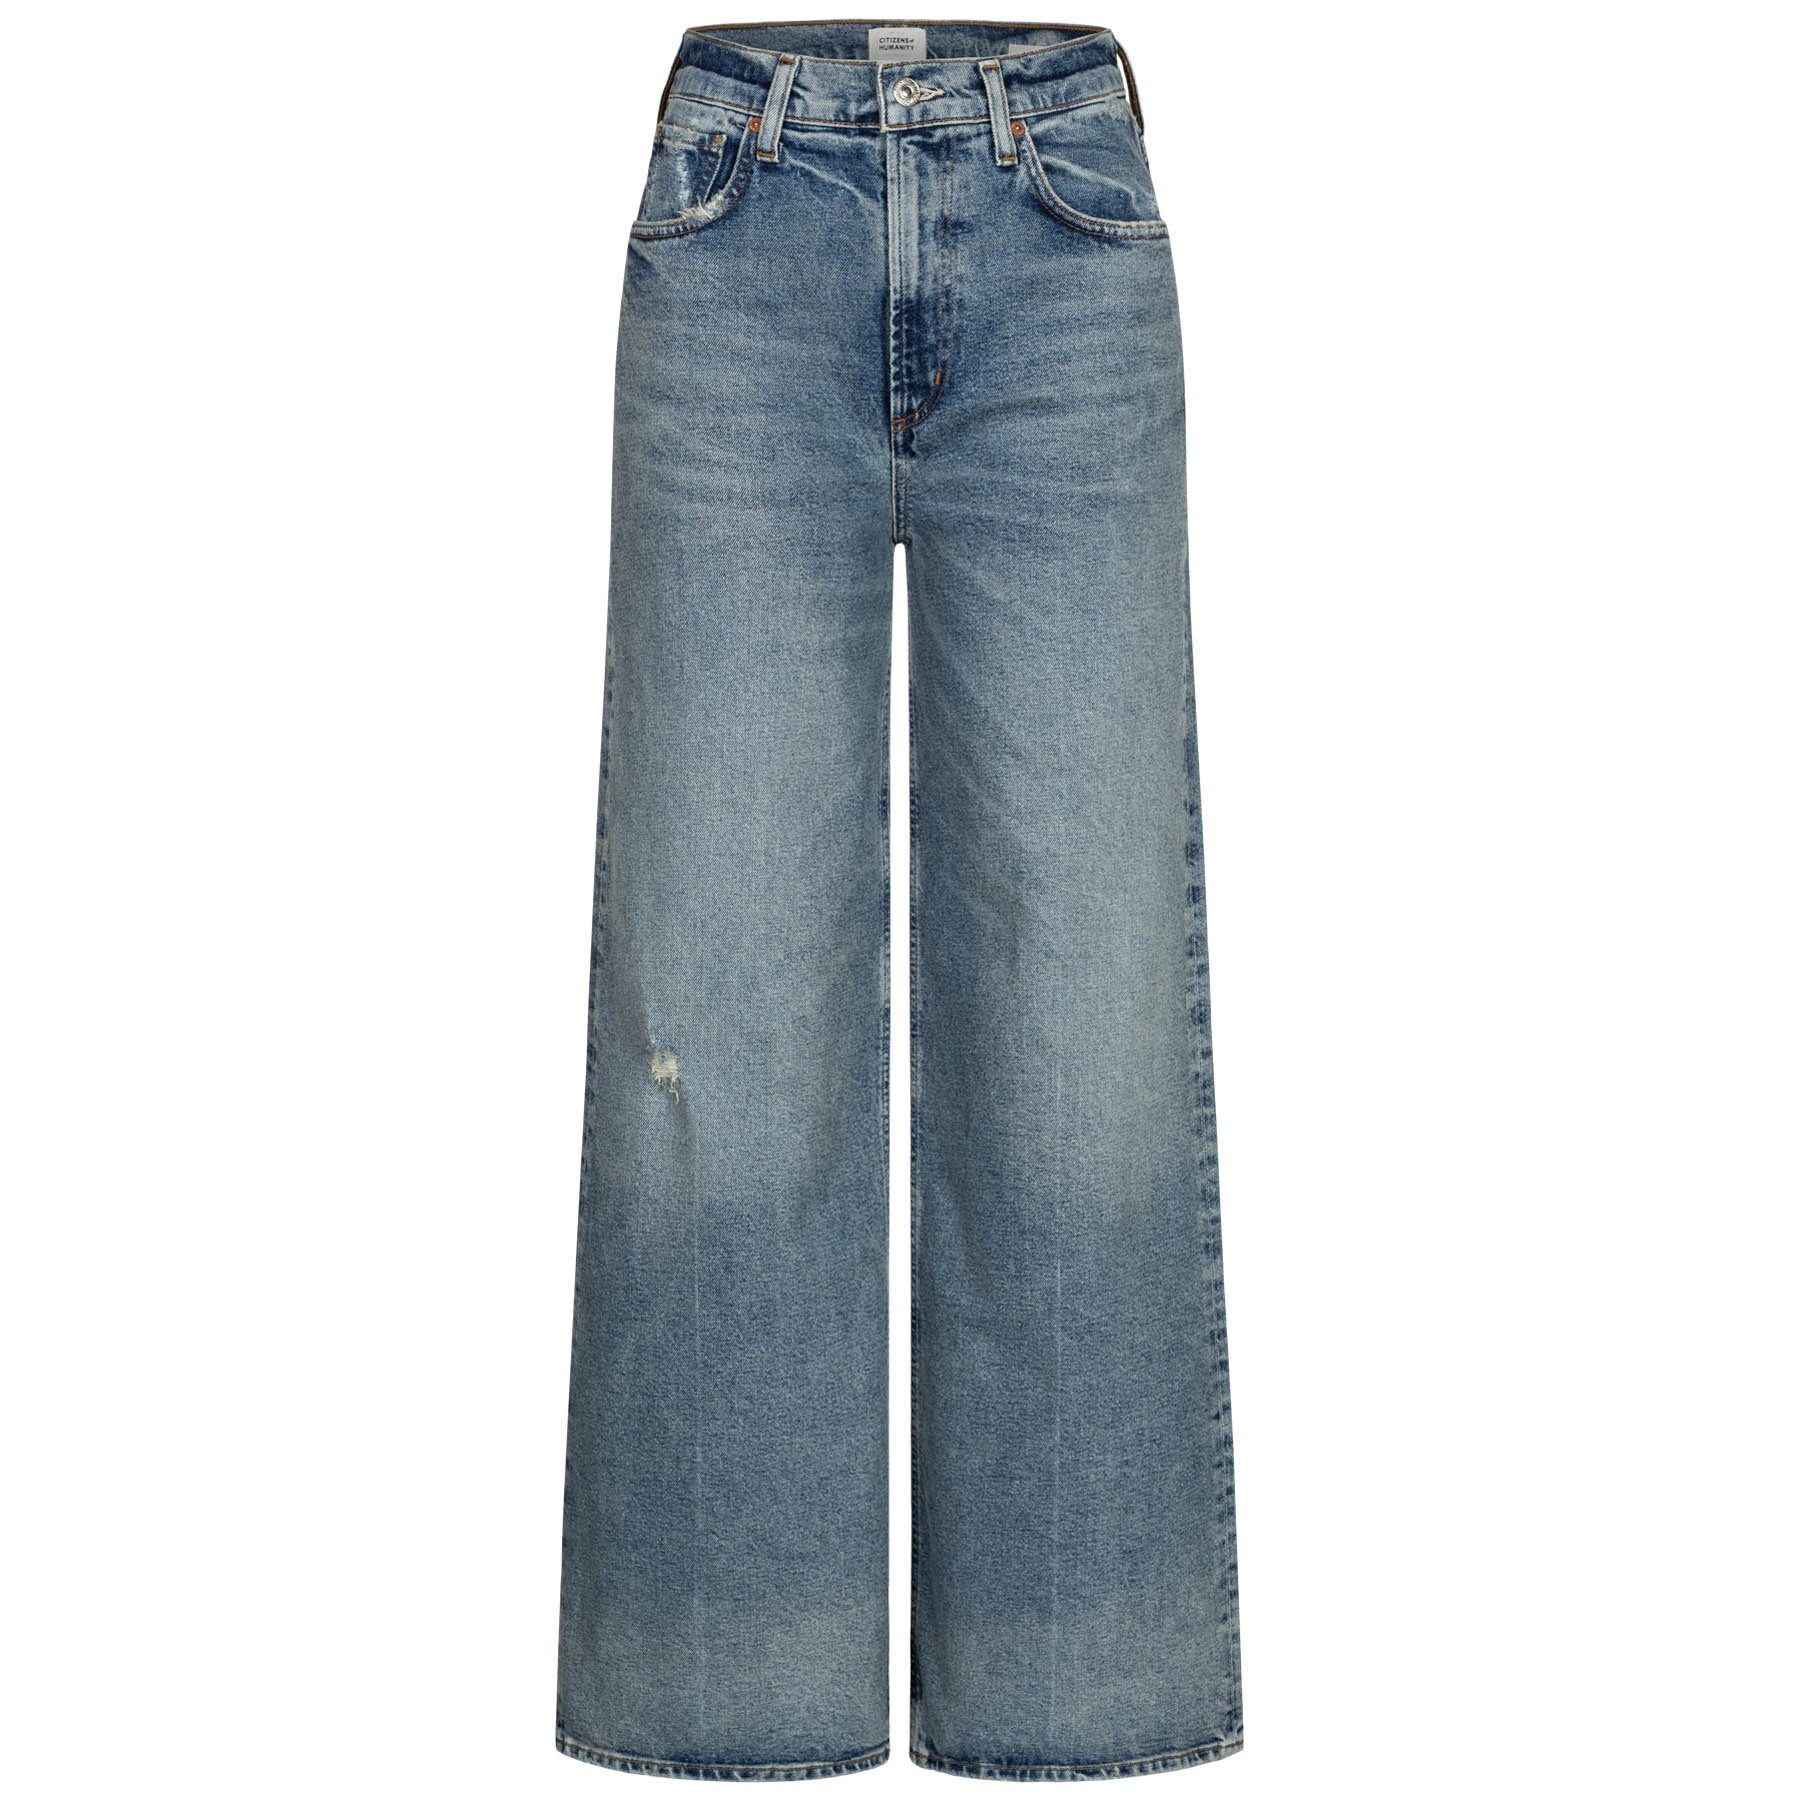 CITIZENS OF HUMANITY High-waist-Jeans Jeans PALOMA aus Baumwolle